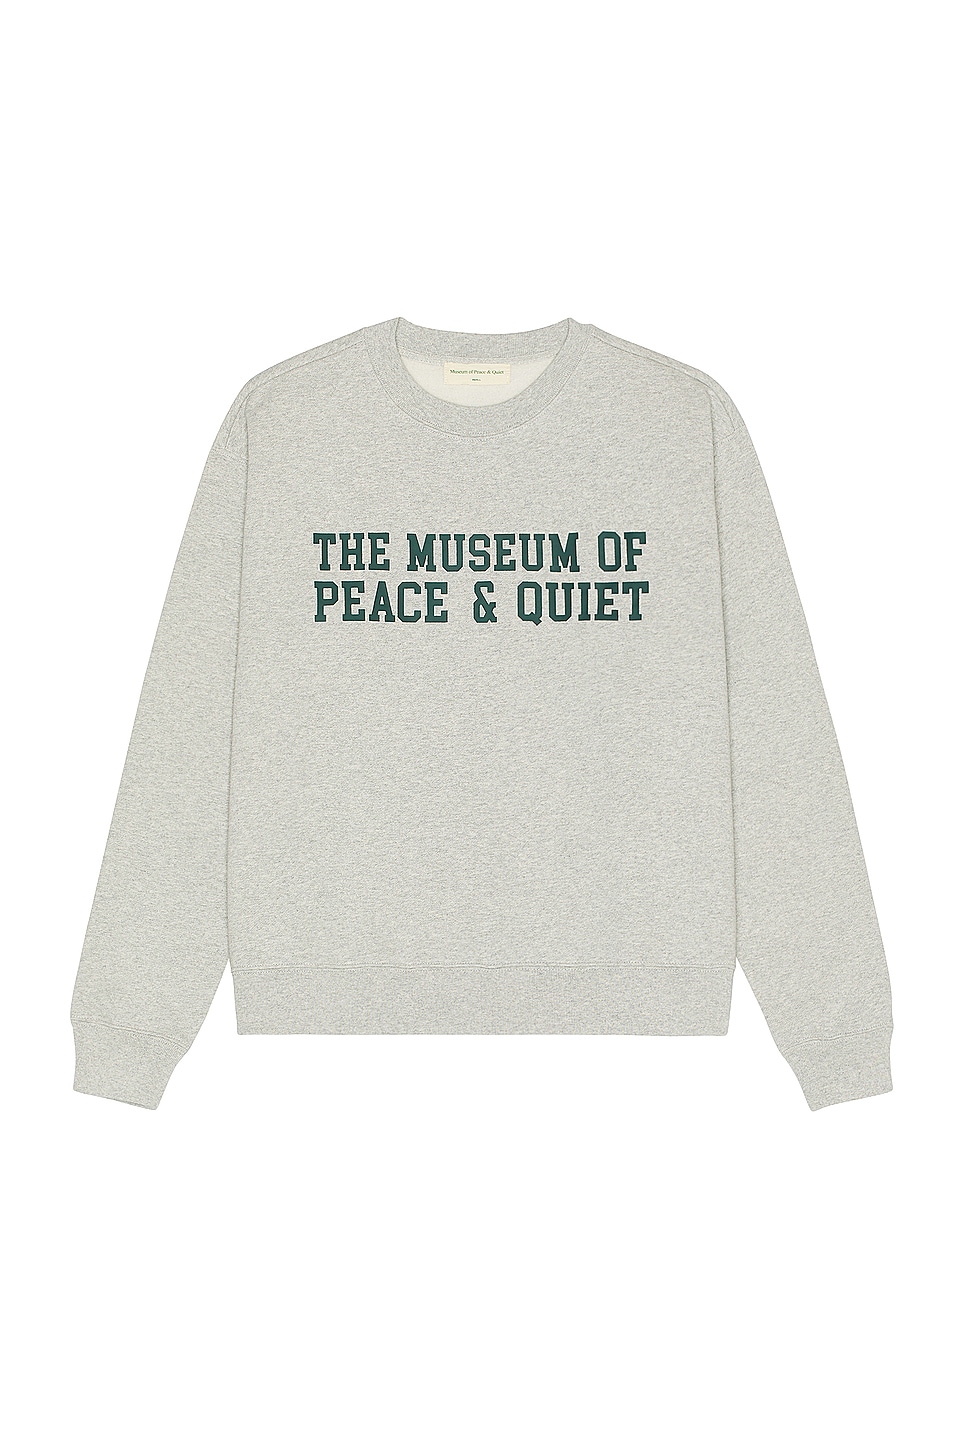 Image 1 of Museum of Peace and Quiet Campus Sweater in Heather